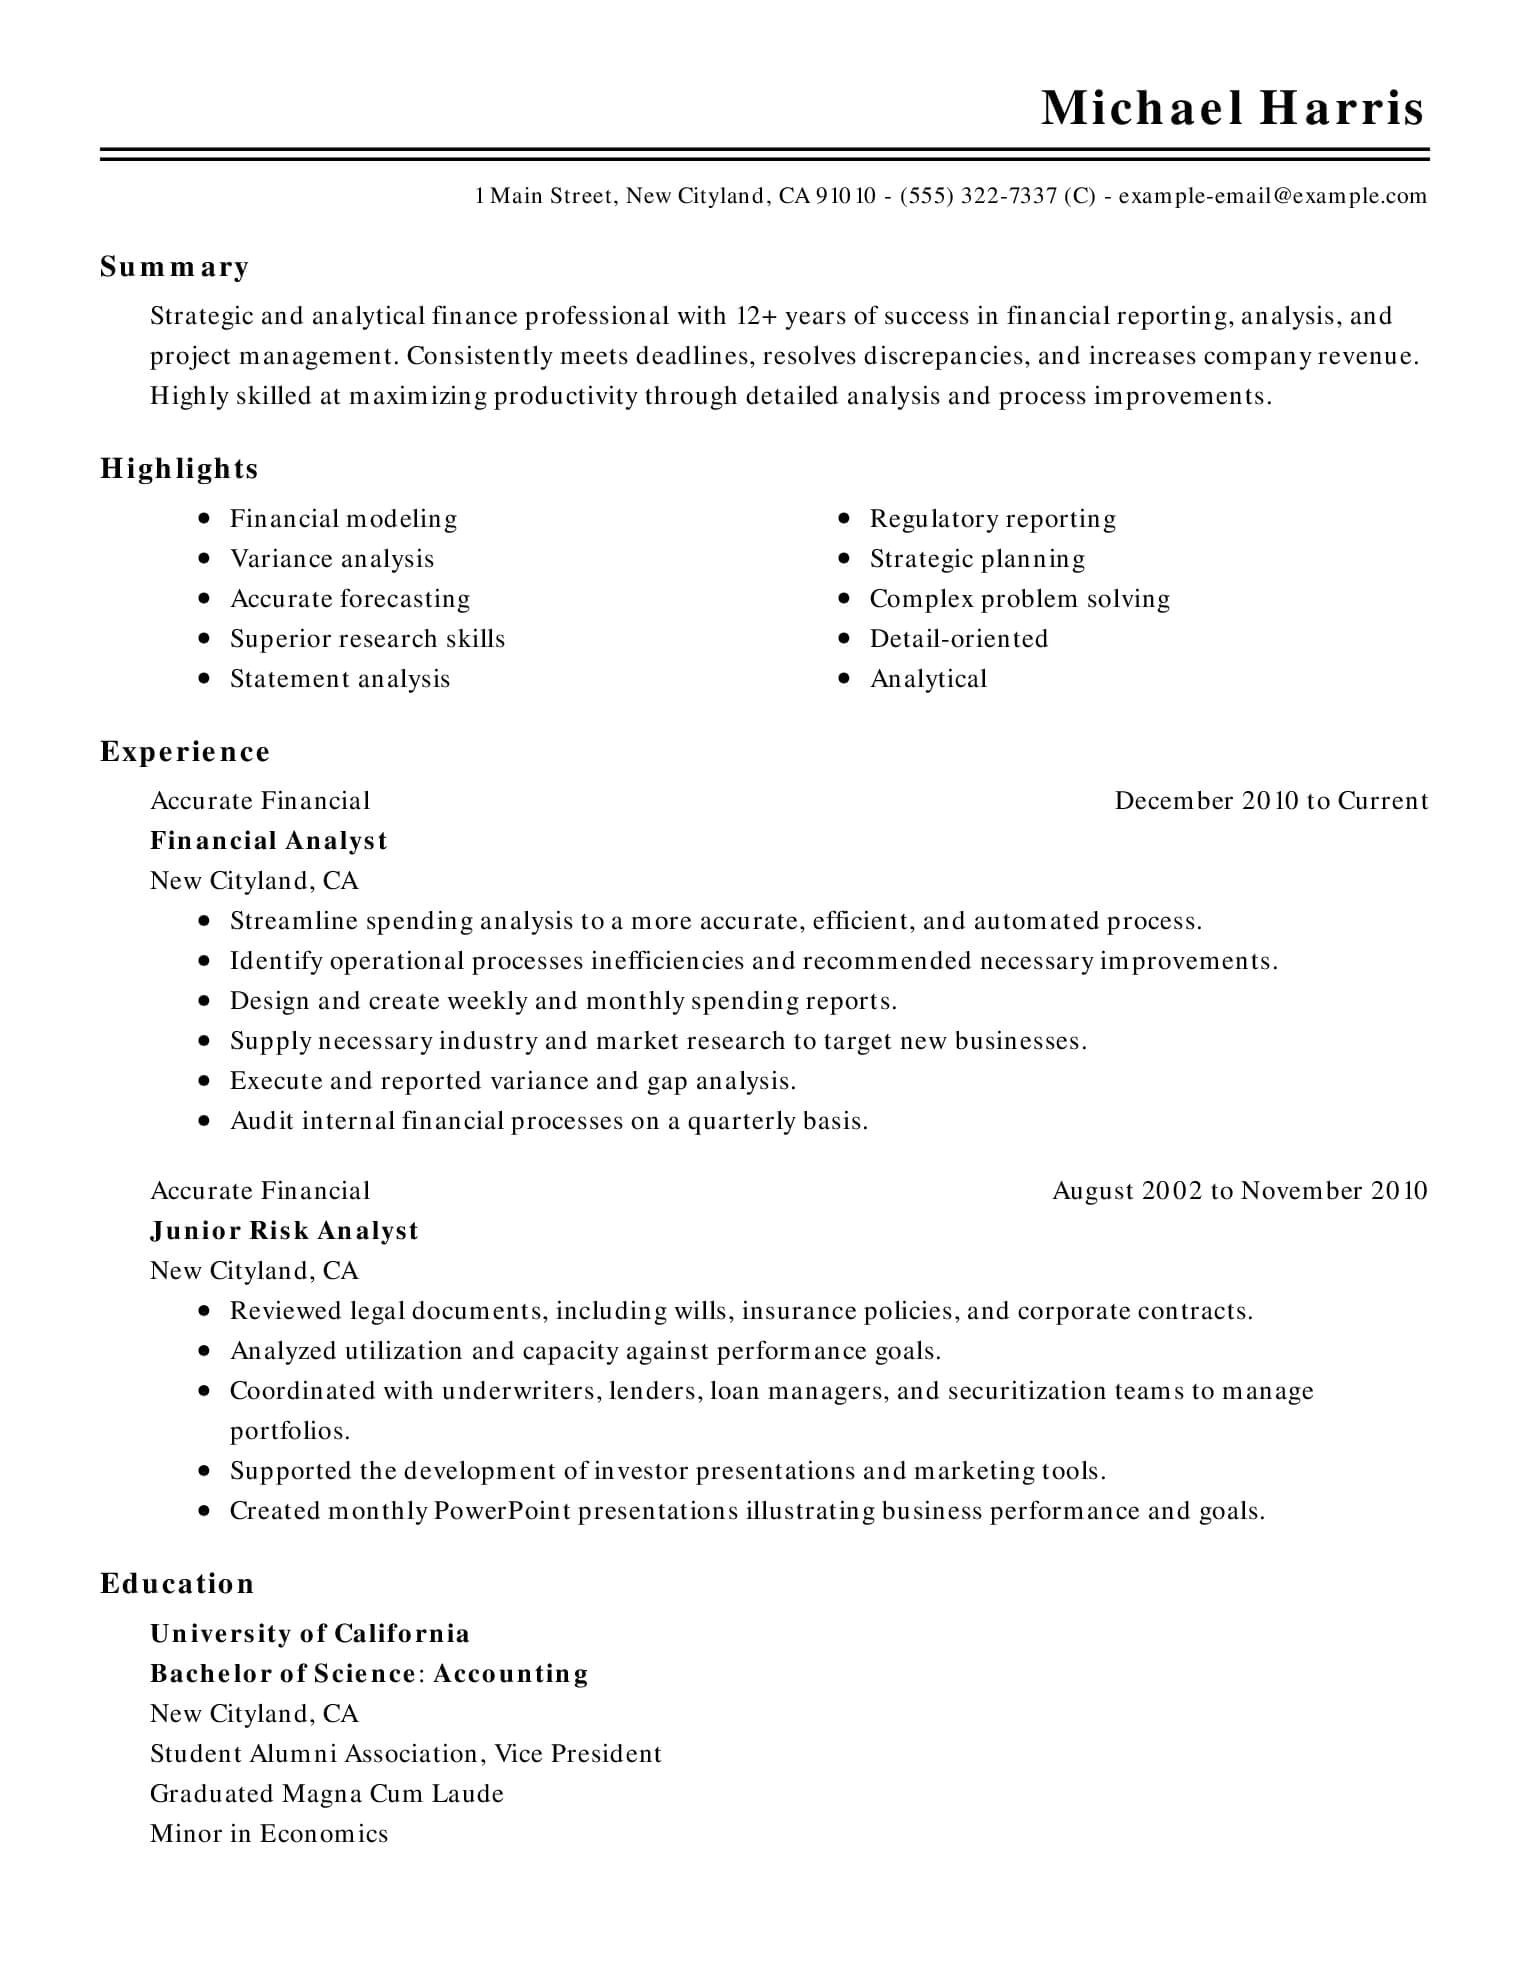 resume for job interview ms word